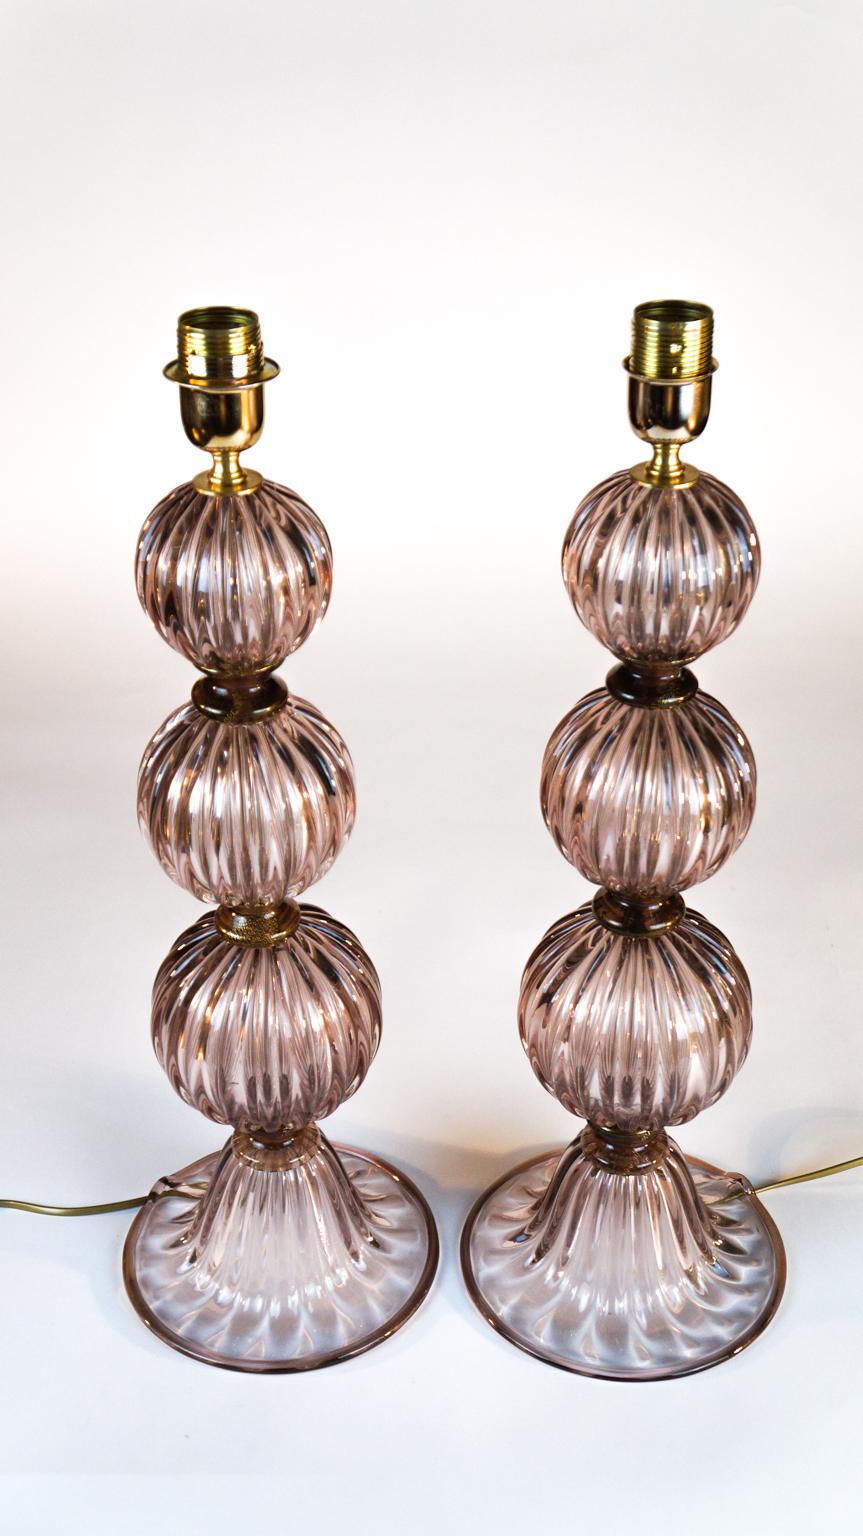 Hand-Crafted Toso Murano Mid-Century Modern Italian Venetian Pair of Table Lamps, 1970s